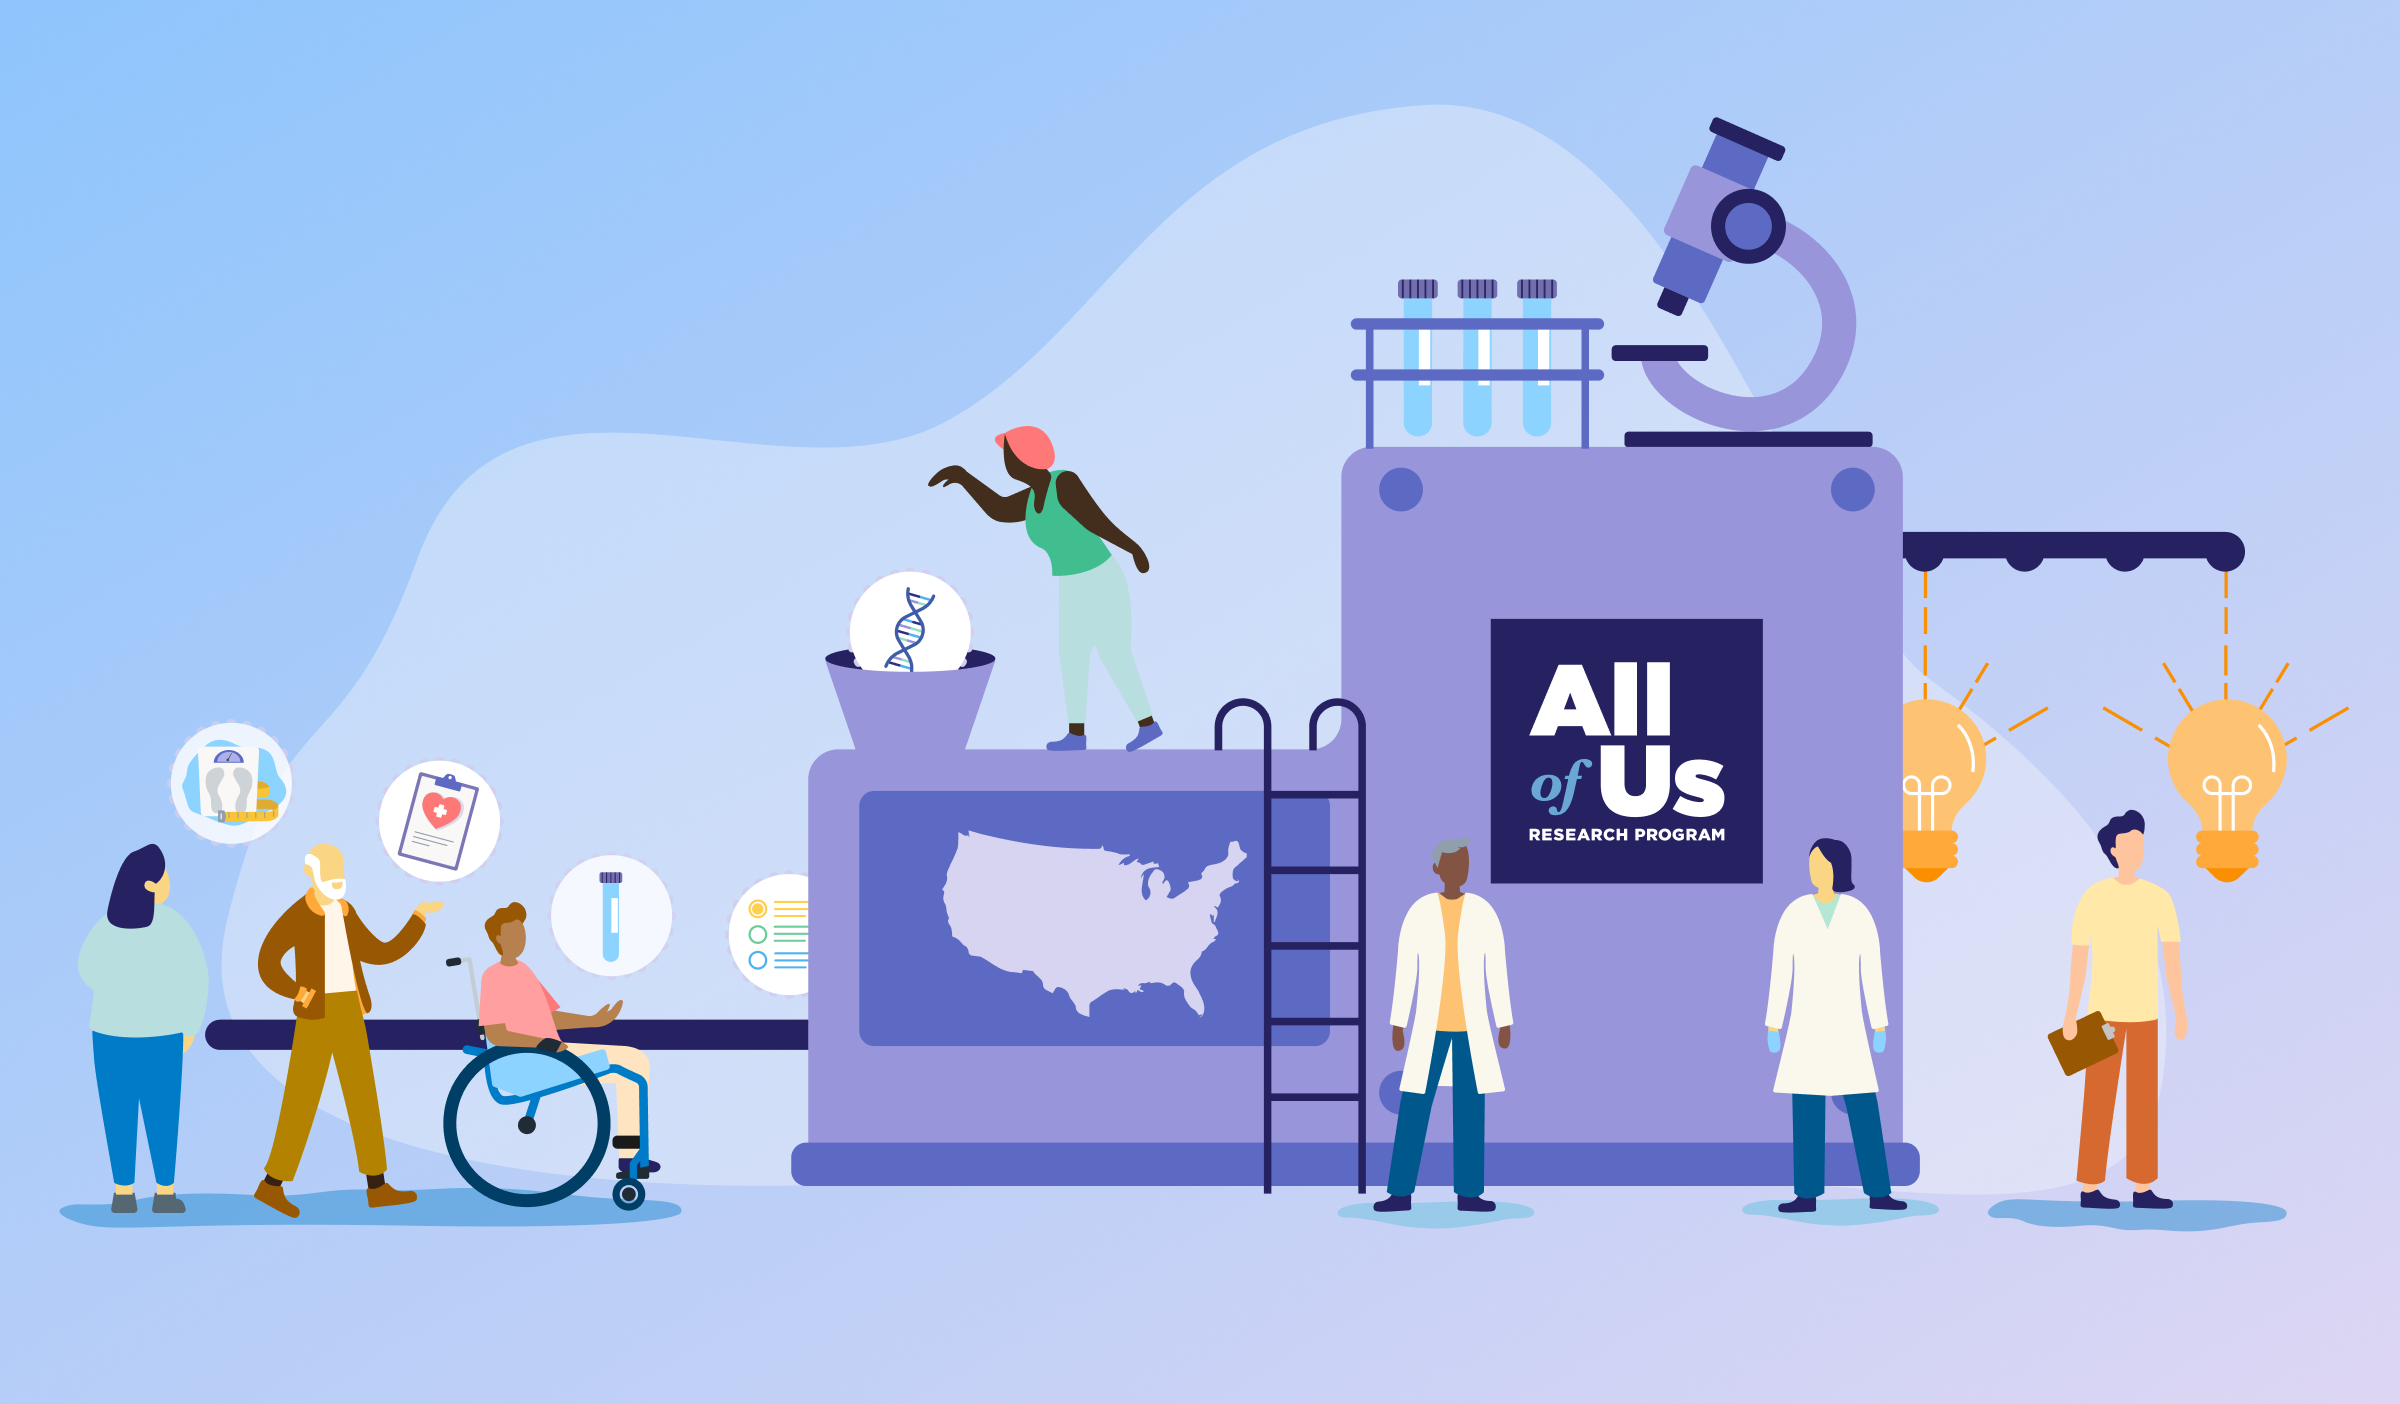 The NIH All of Us Research Program